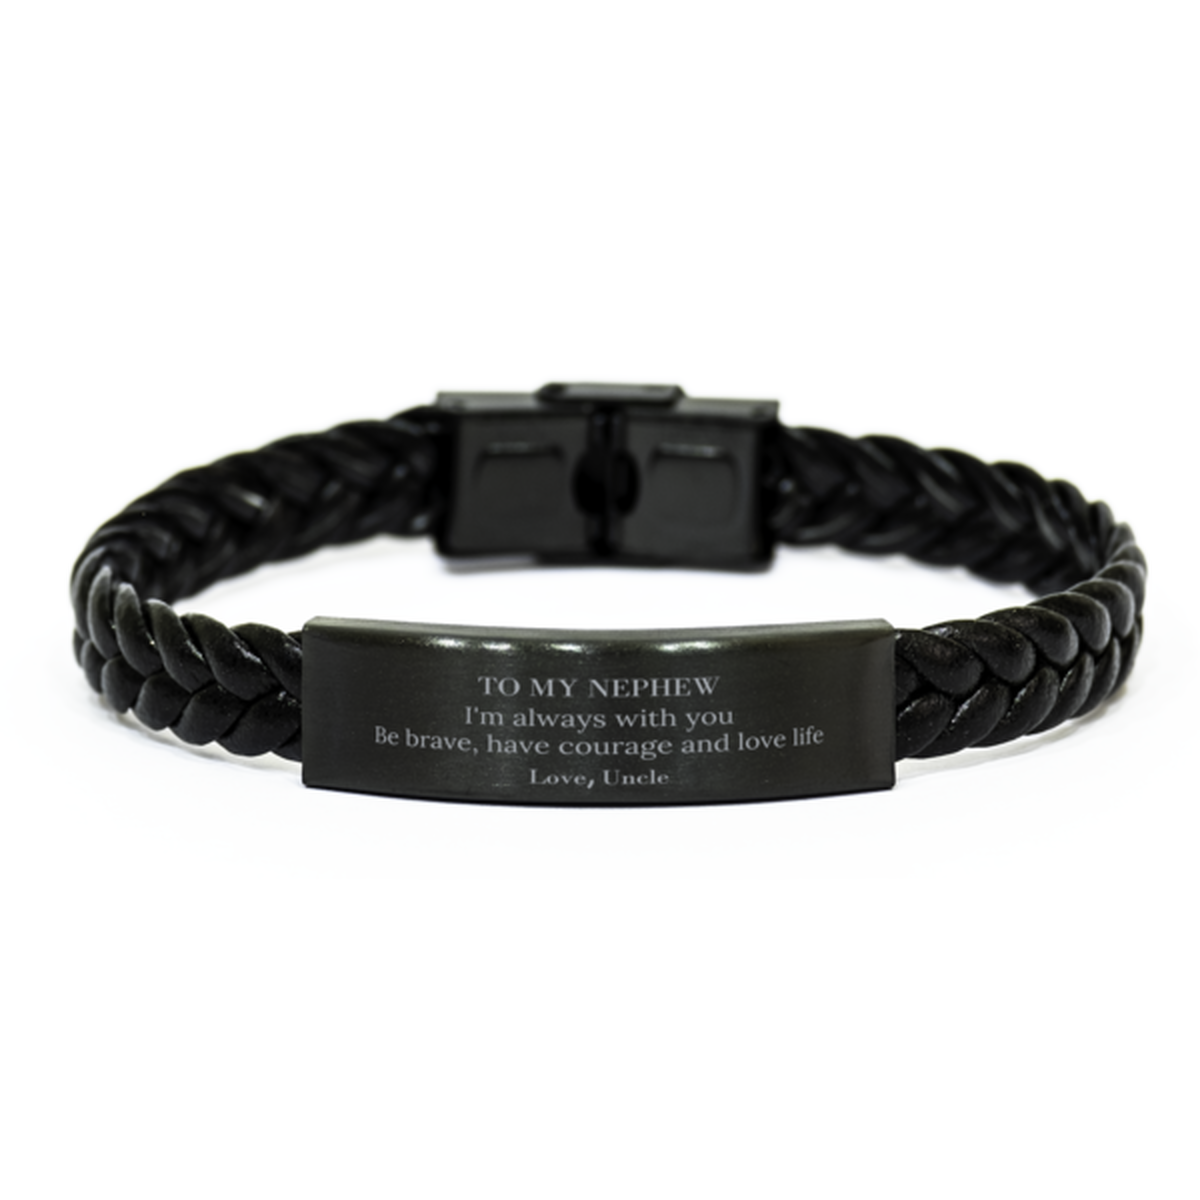 To My Nephew Gifts from Uncle, Unique Braided Leather Bracelet Inspirational Christmas Birthday Graduation Gifts for Nephew I'm always with you. Be brave, have courage and love life. Love, Uncle